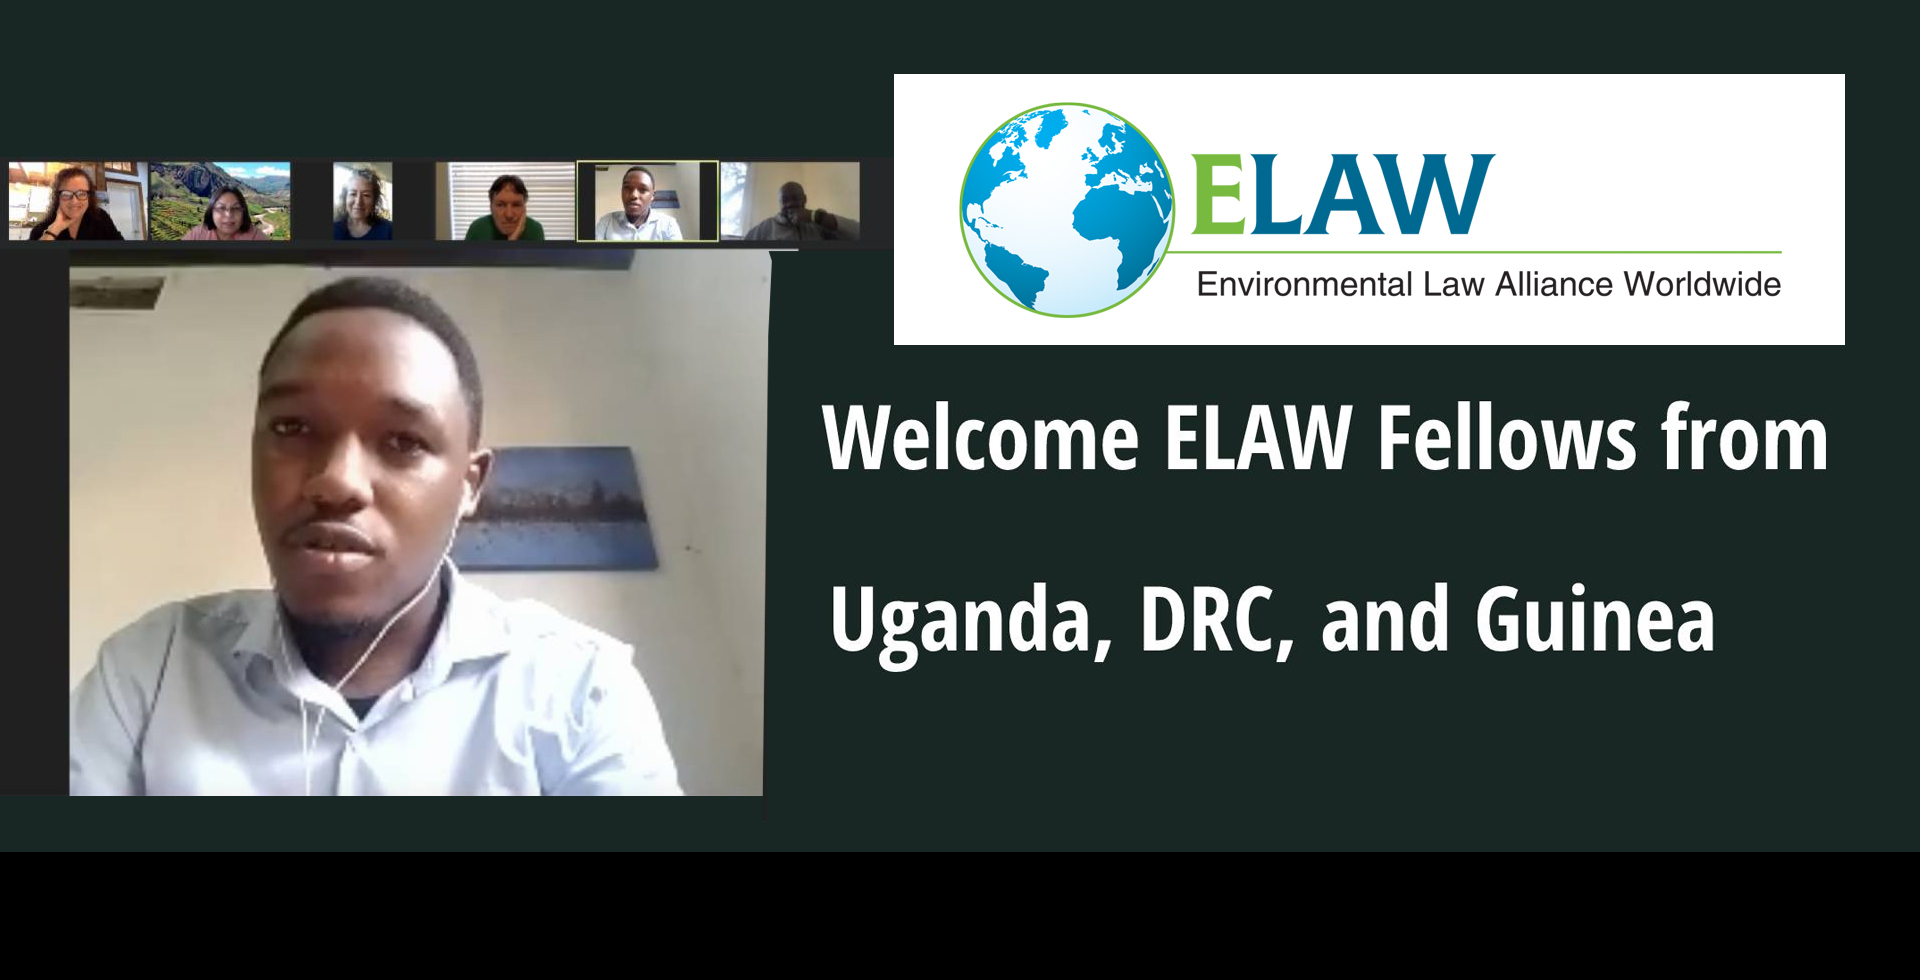 Welcome ELAW Fellows ﻿from Uganda, DRC, and Guinea